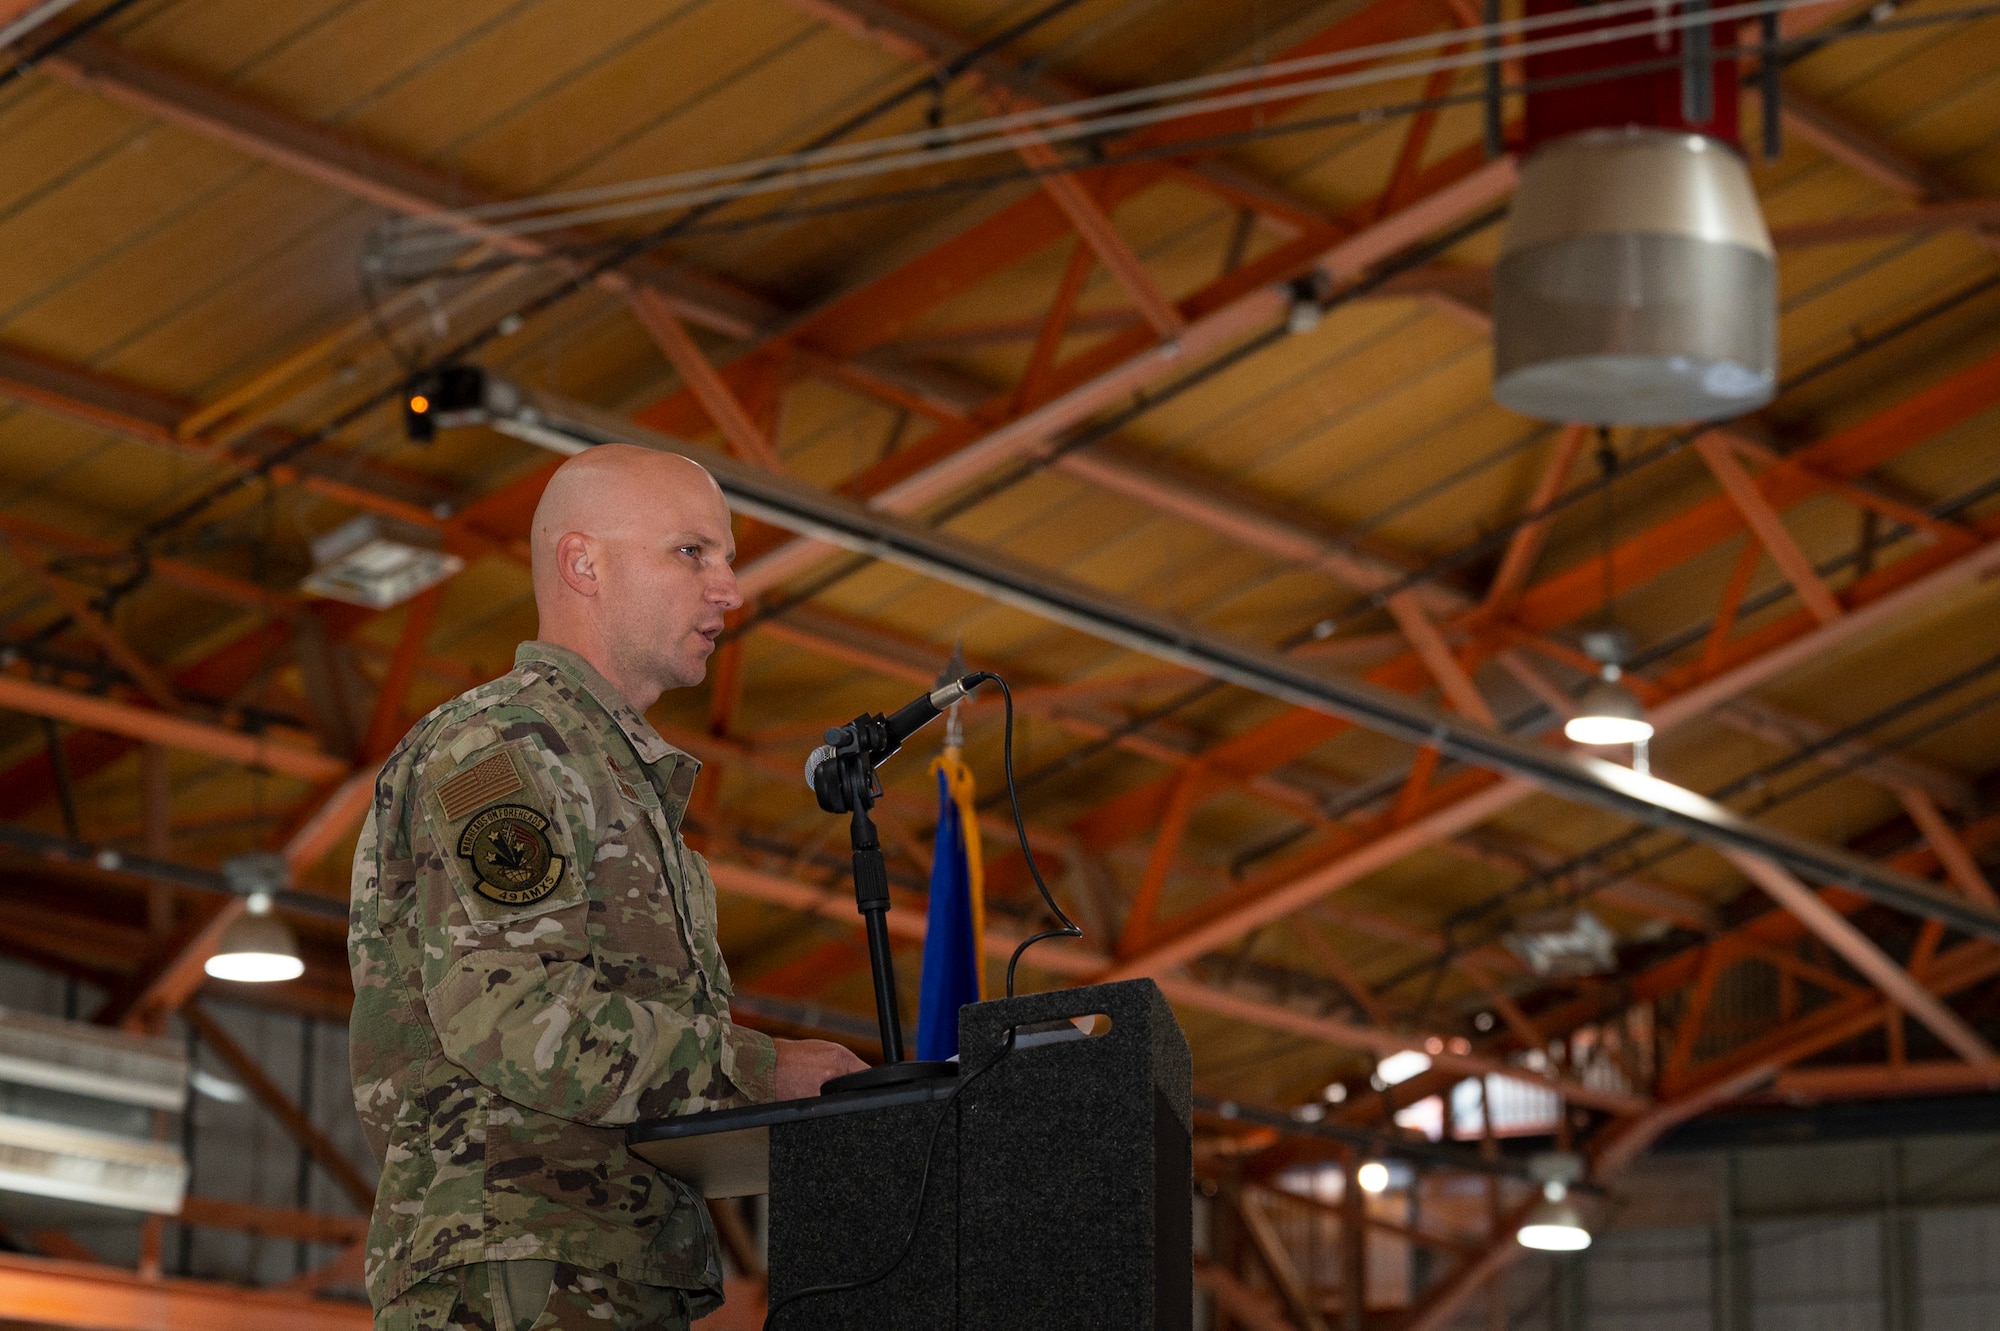 U.S. Air Force Maj. Donald Bolda, 49th Aircraft Maintenance Squadron commander, gives closing remarks during the 2022 Dedicated Crew Chief Appointment Ceremony at Holloman Air Force Base, New Mexico, Nov. 18, 2022. Dedicated Crew Chiefs must maintain aircraft in a combat ready status to ensure pilots and sensor operators can train to become a successful remotely piloted aircraft aircrew. (U.S. Air Force photo by Airman 1st Class Isaiah Pedrazzini)